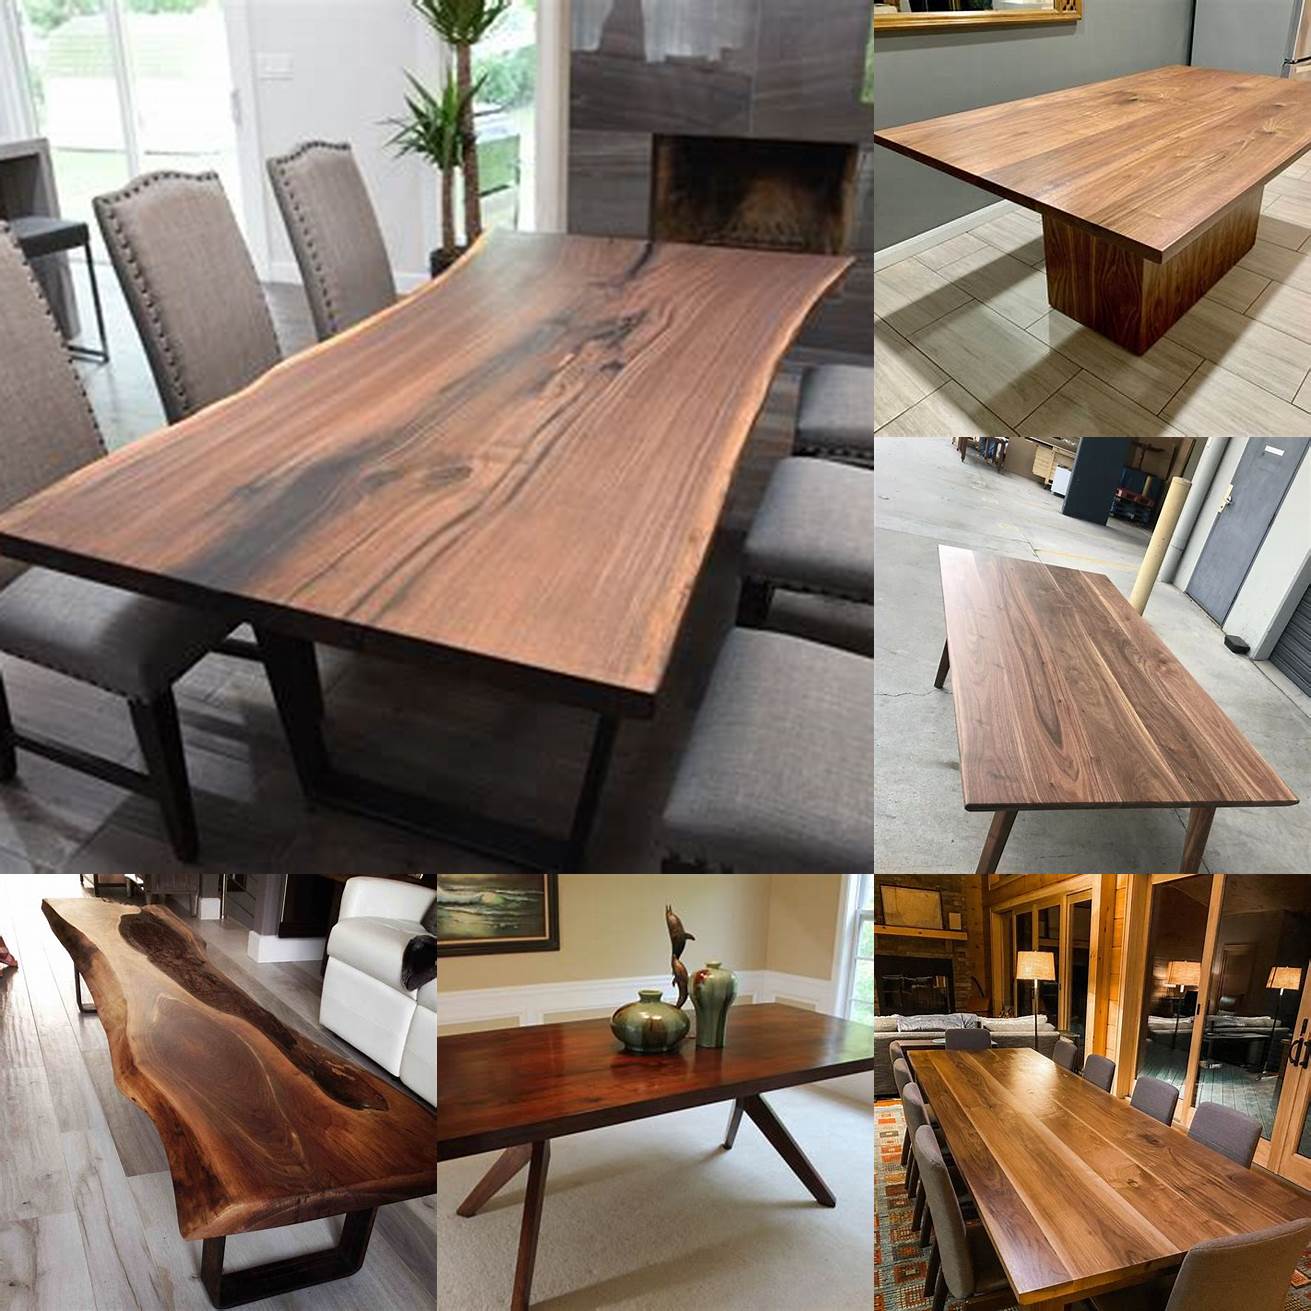 4 Value While walnut furniture can be more expensive than some other types of wood it is a worthwhile investment